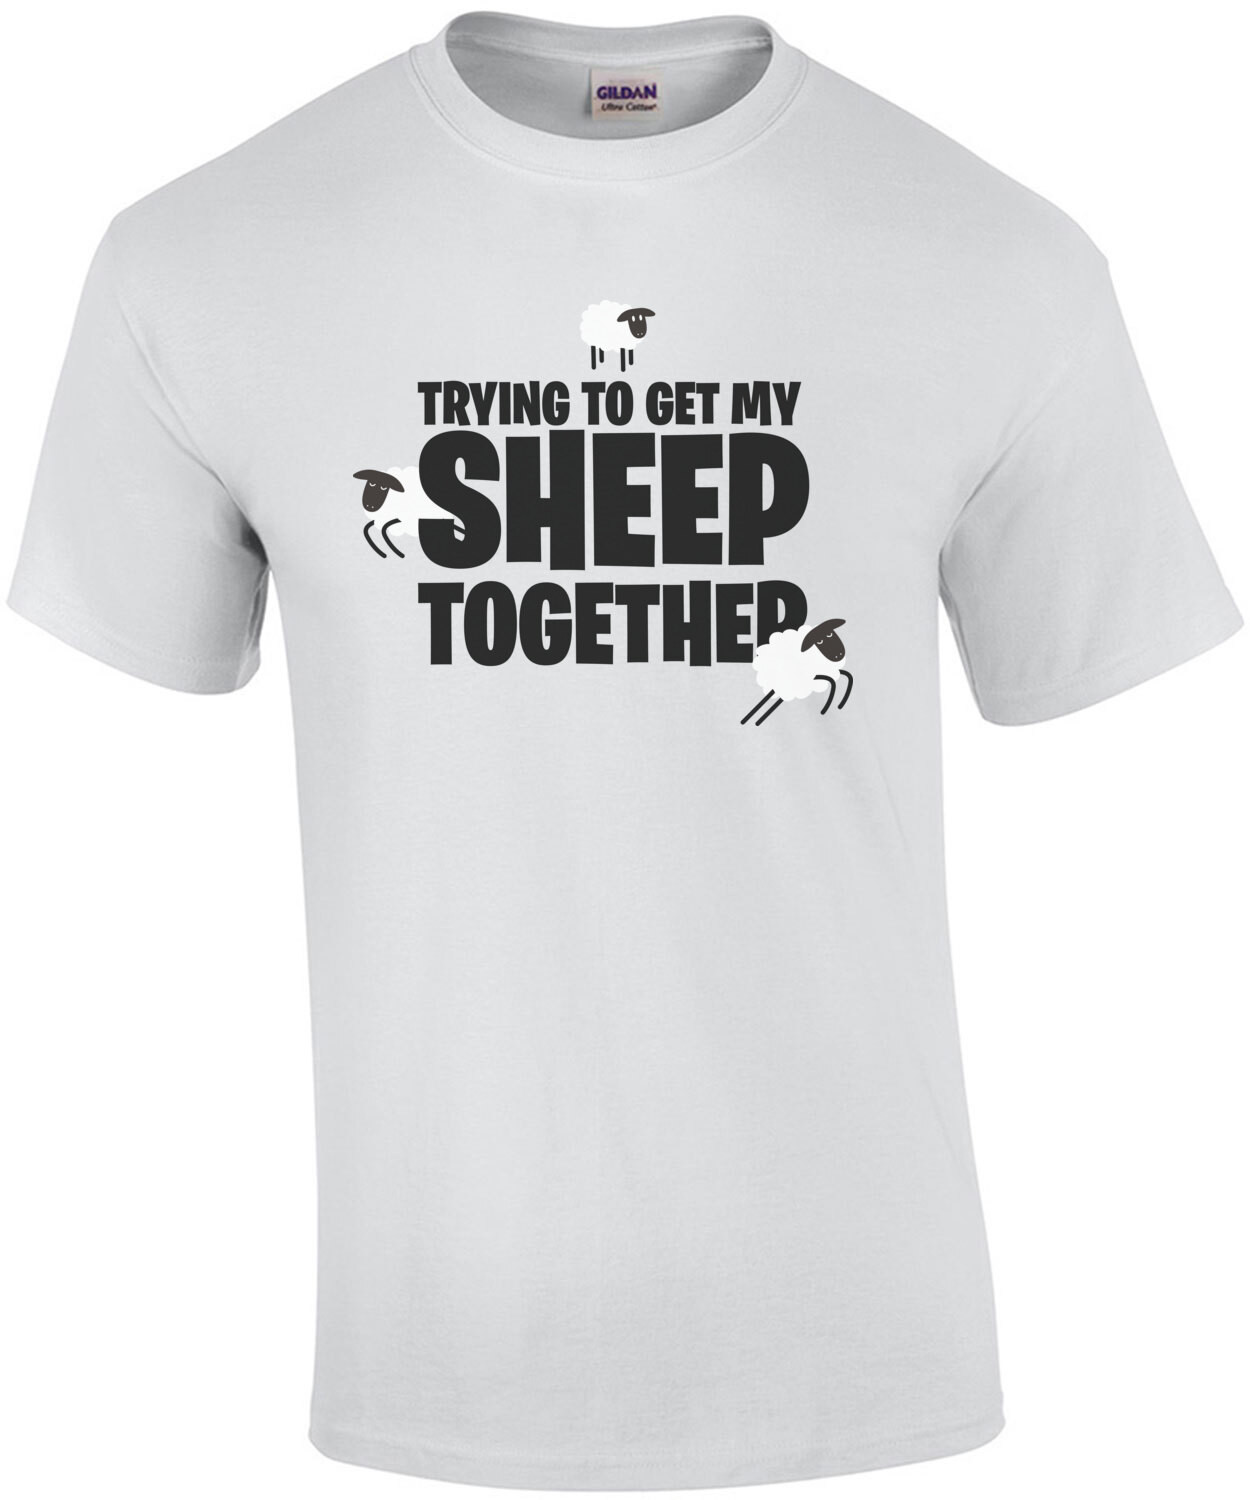 Trying to get my sheep together - pun t-shirt